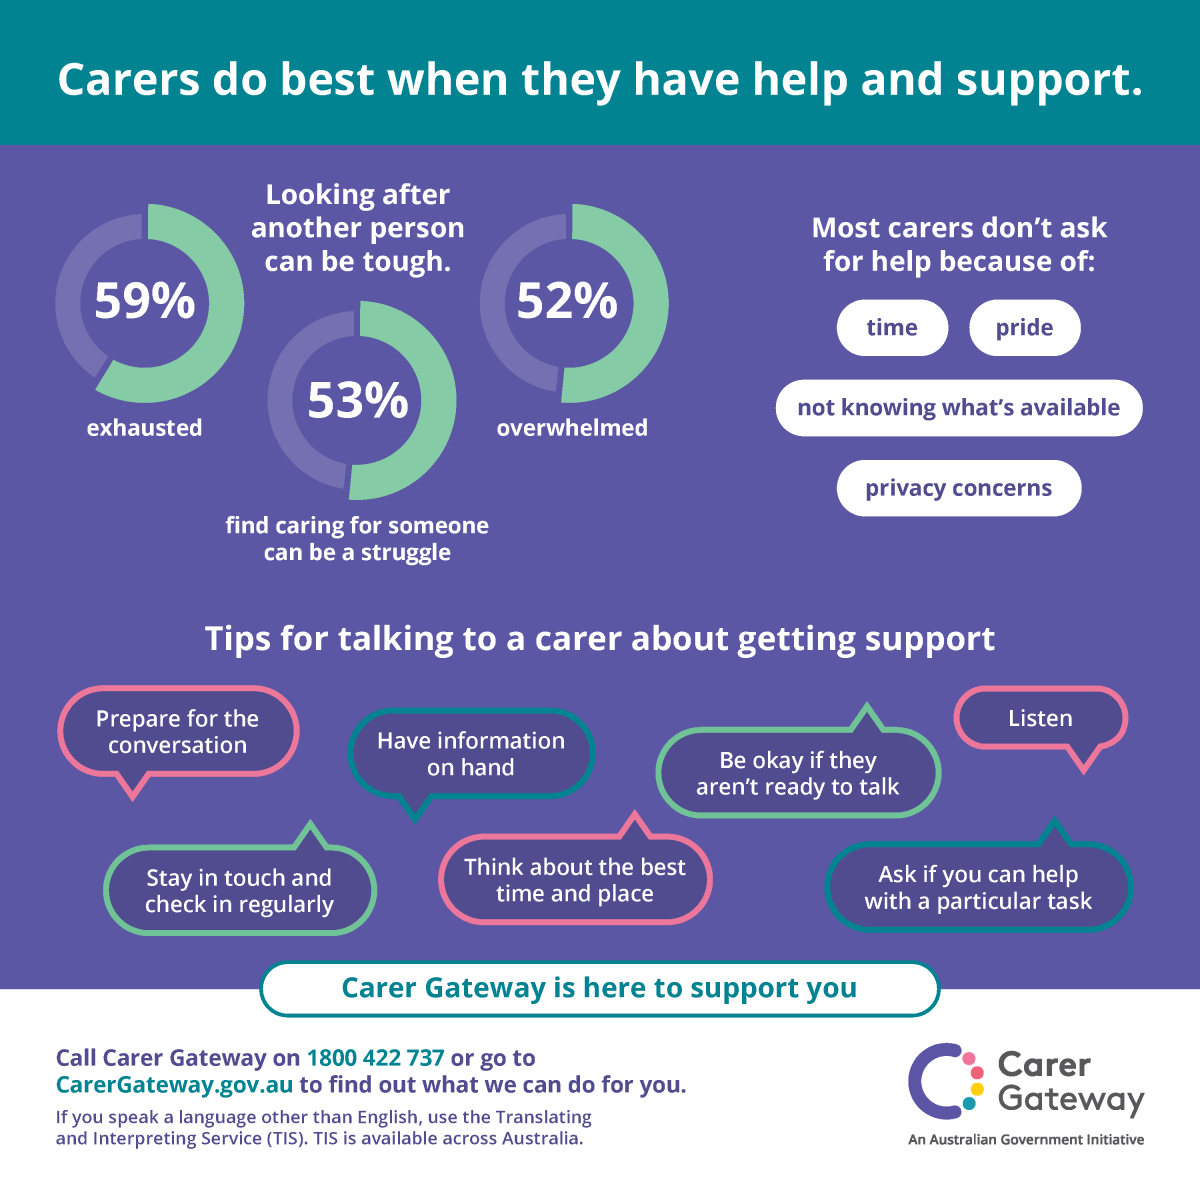 Carers do best when they have help and support.